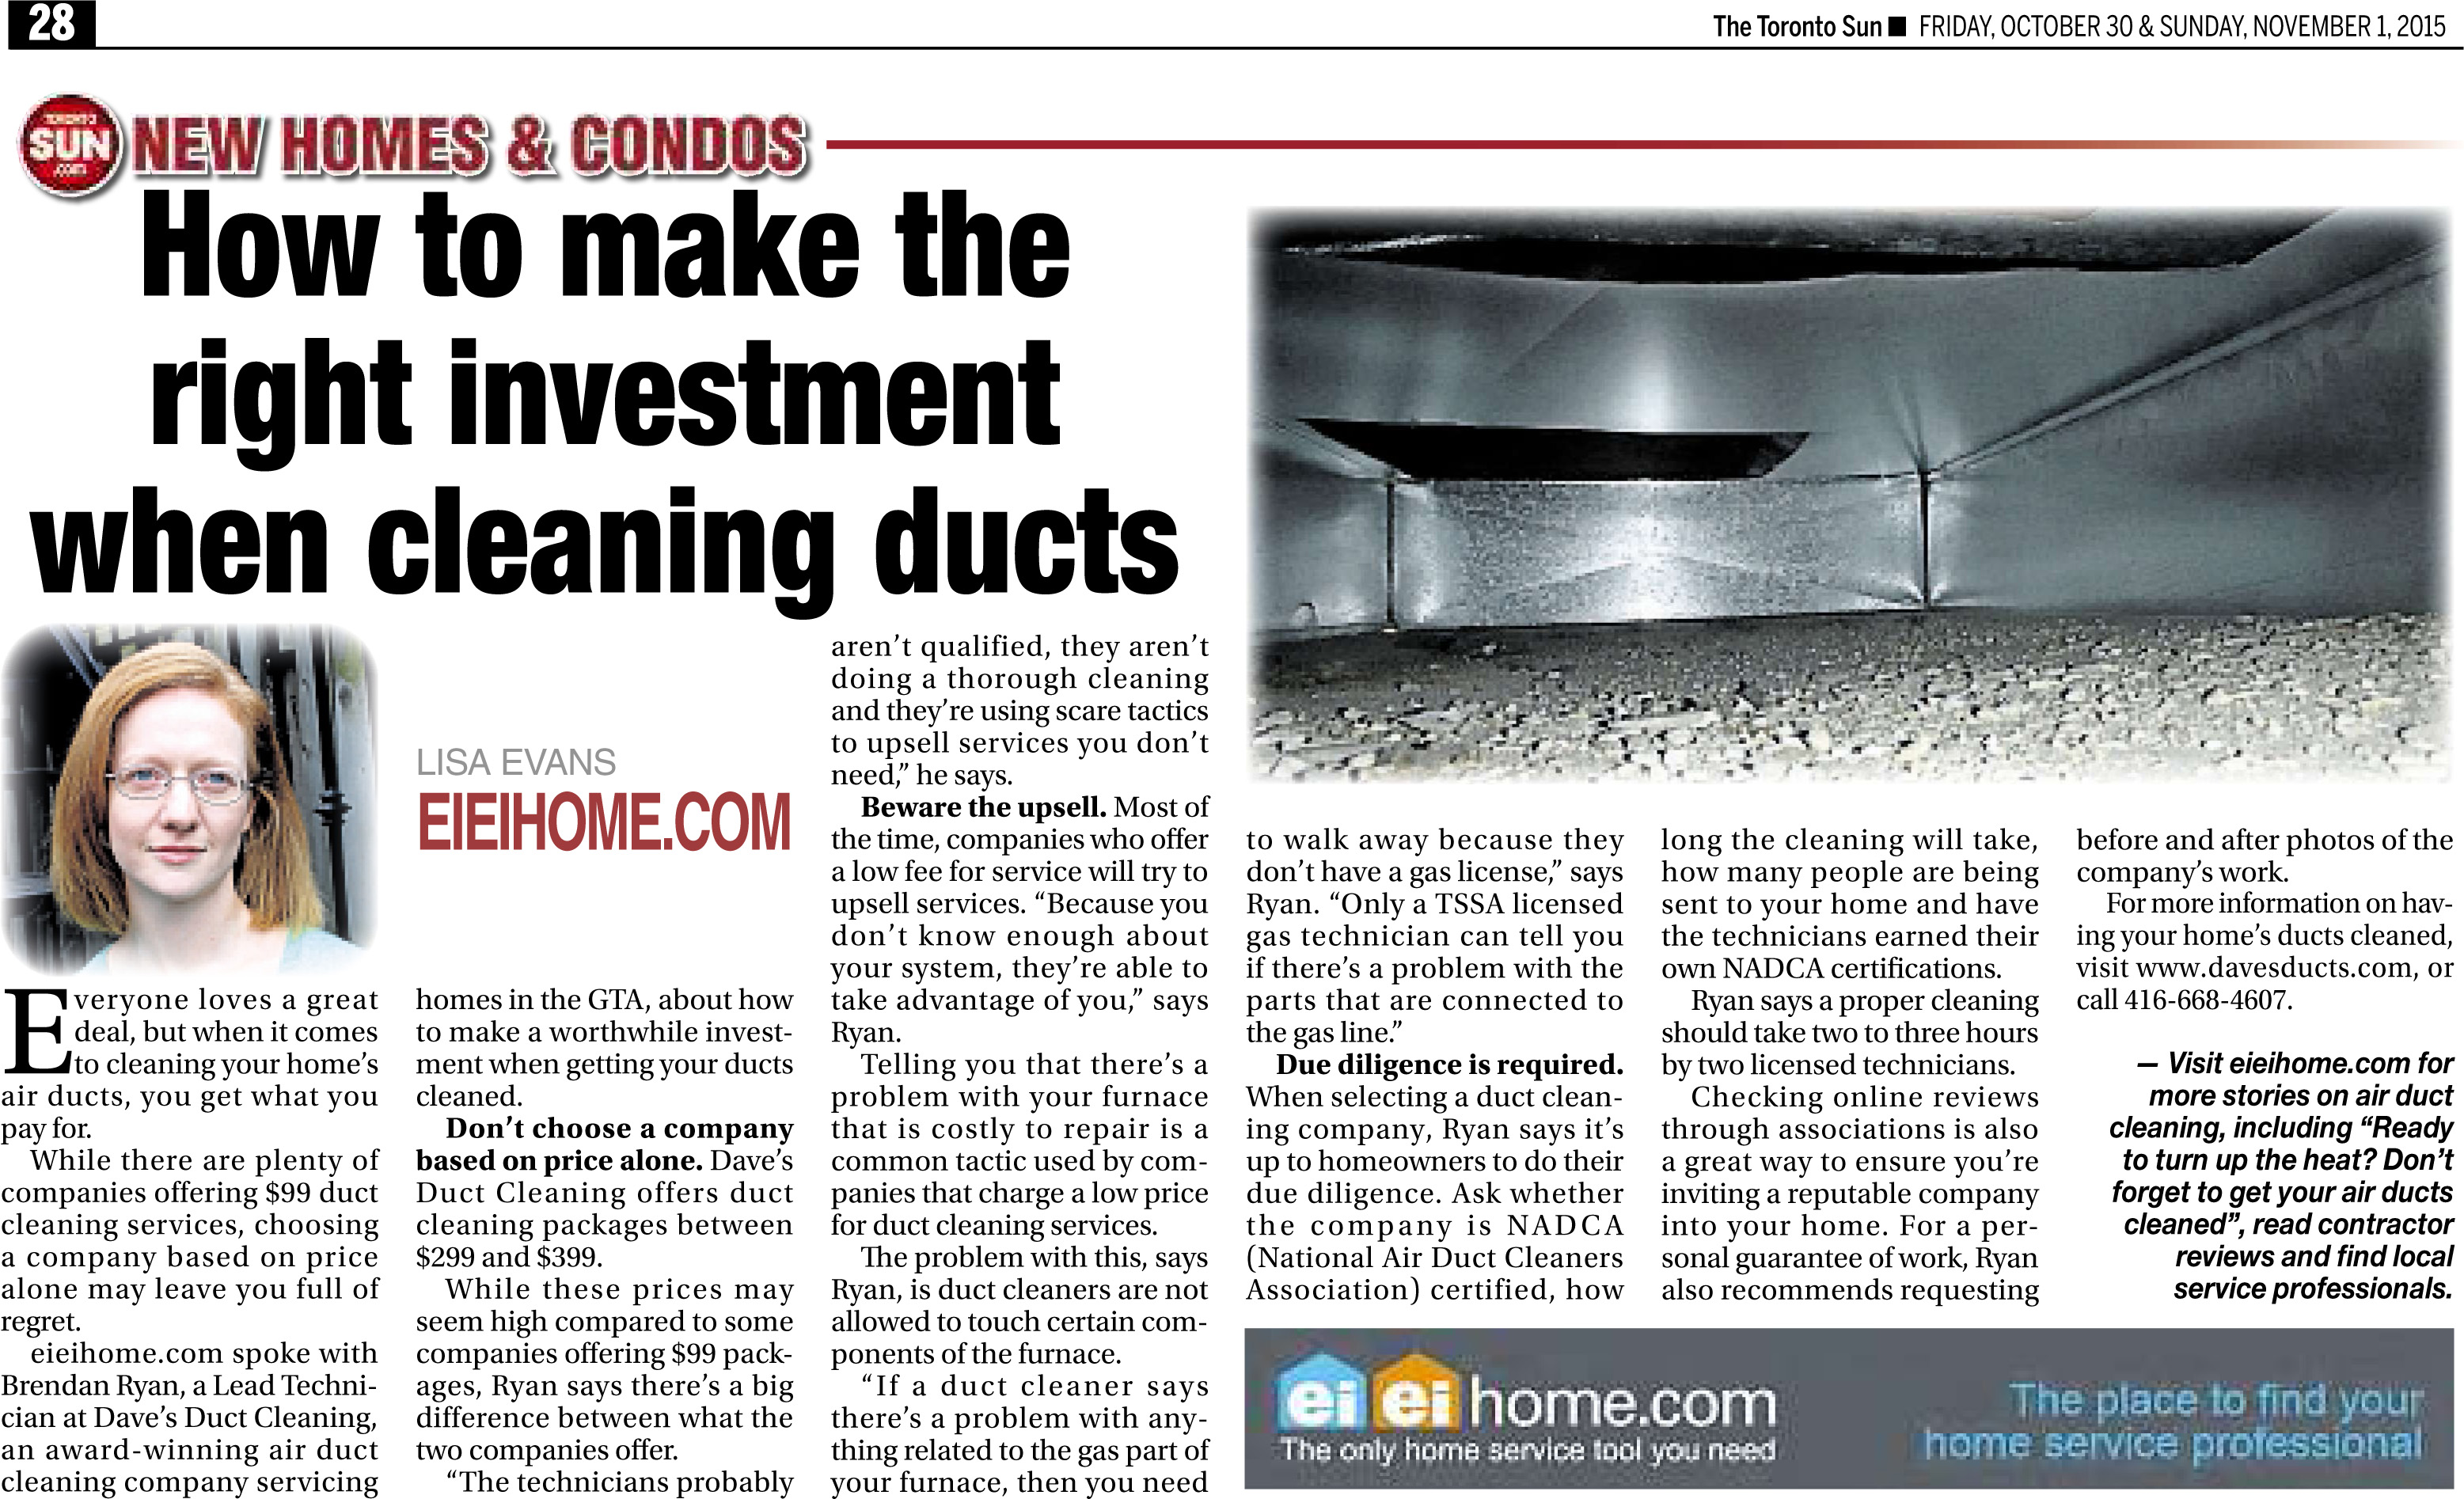 Toronto Sun - How to make the right investment when cleaning your air ducts_edited